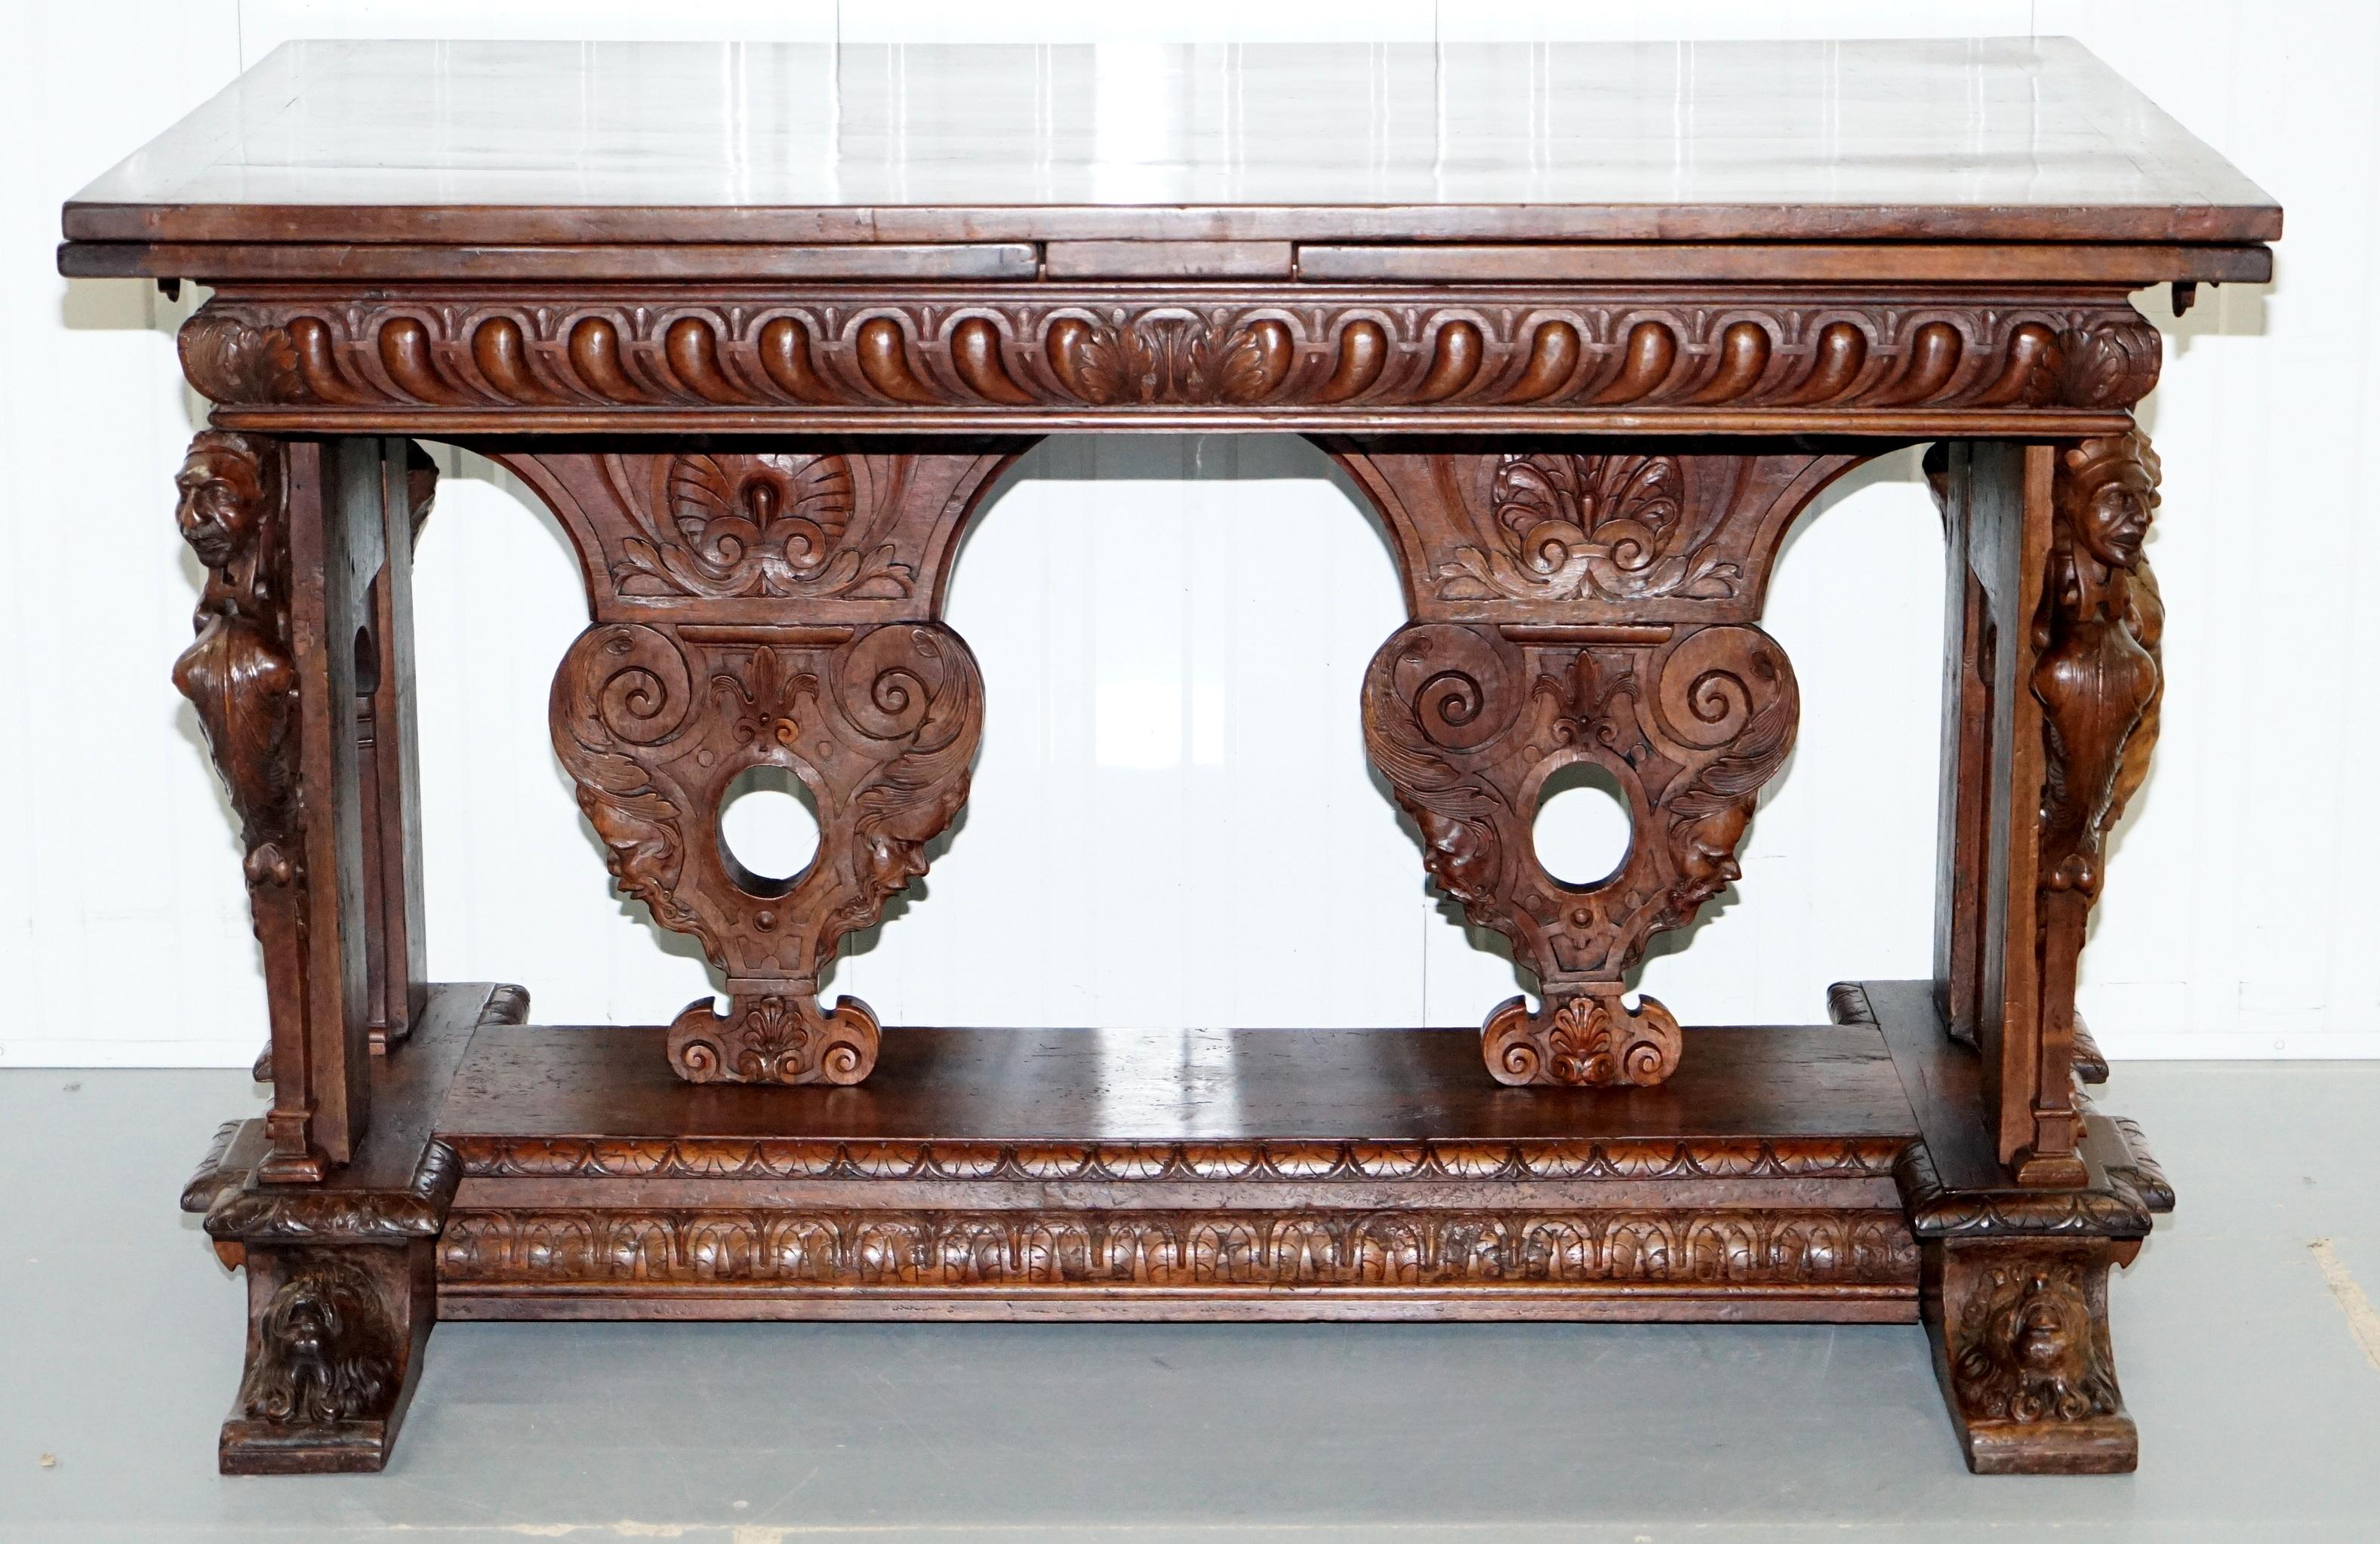 We are delighted to offer for sale this exceptional early 18th century French Renaissance Walnut extending table in the style of Jacques Androuet du Cerceau and Hugues Sambin

This table is heavily carved in solid walnut in the Renaissance manner.